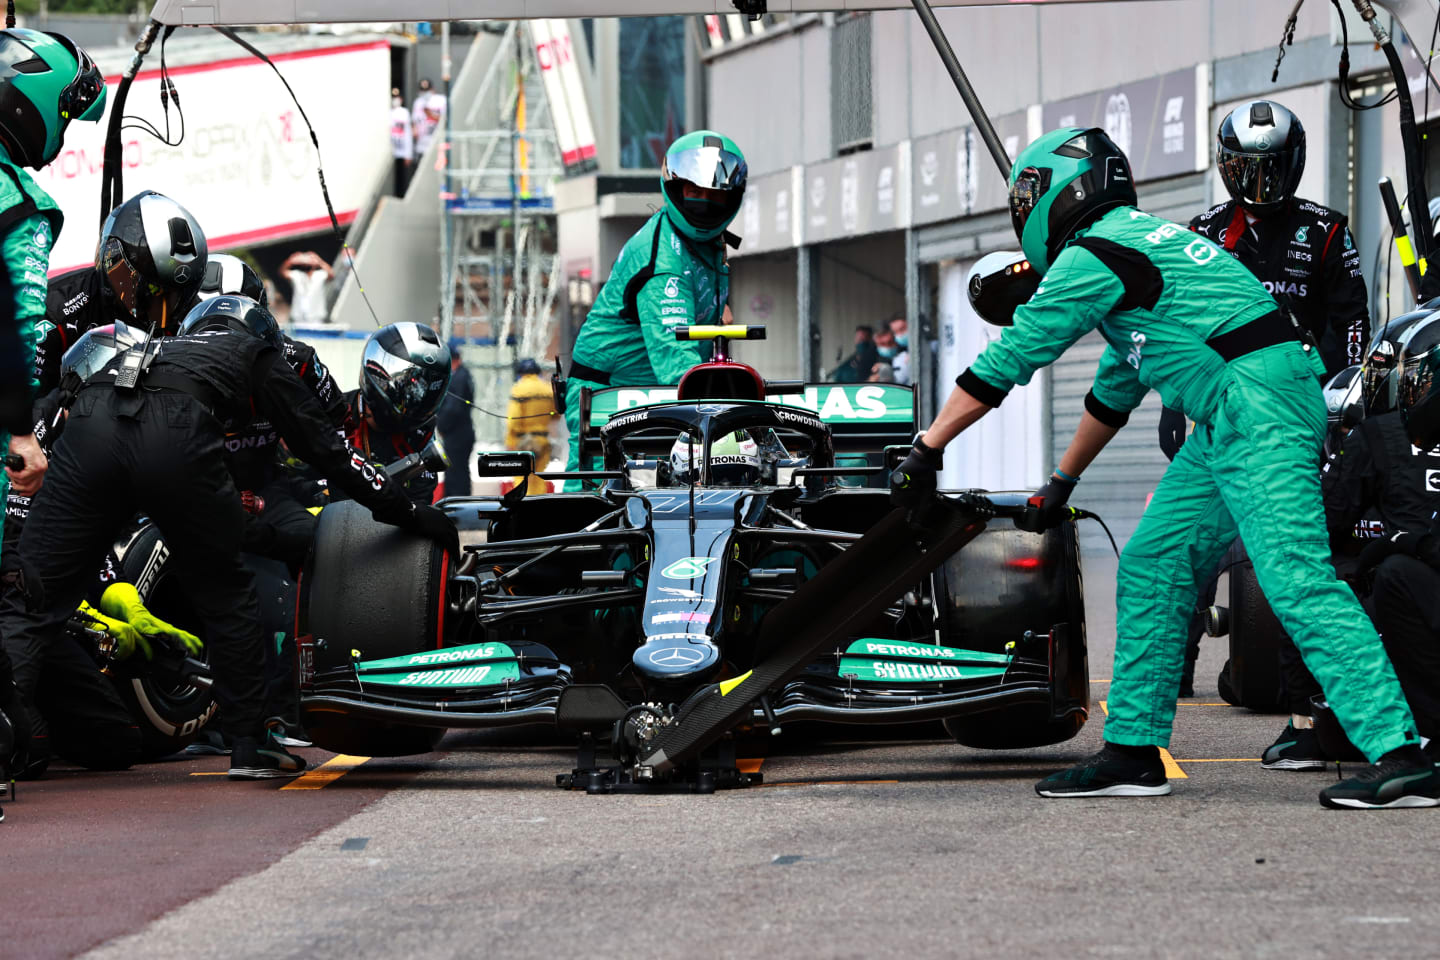 MONTE-CARLO, MONACO - MAY 23: Valtteri Bottas of Finland driving the (77) Mercedes AMG Petronas F1 Team Mercedes W12 makes a pitstop but his front right wheel is stuck on his car leading to his retirement from the race during the F1 Grand Prix of Monaco at Circuit de Monaco on May 23, 2021 in Monte-Carlo, Monaco. (Photo by Mark Thompson/Getty Images)